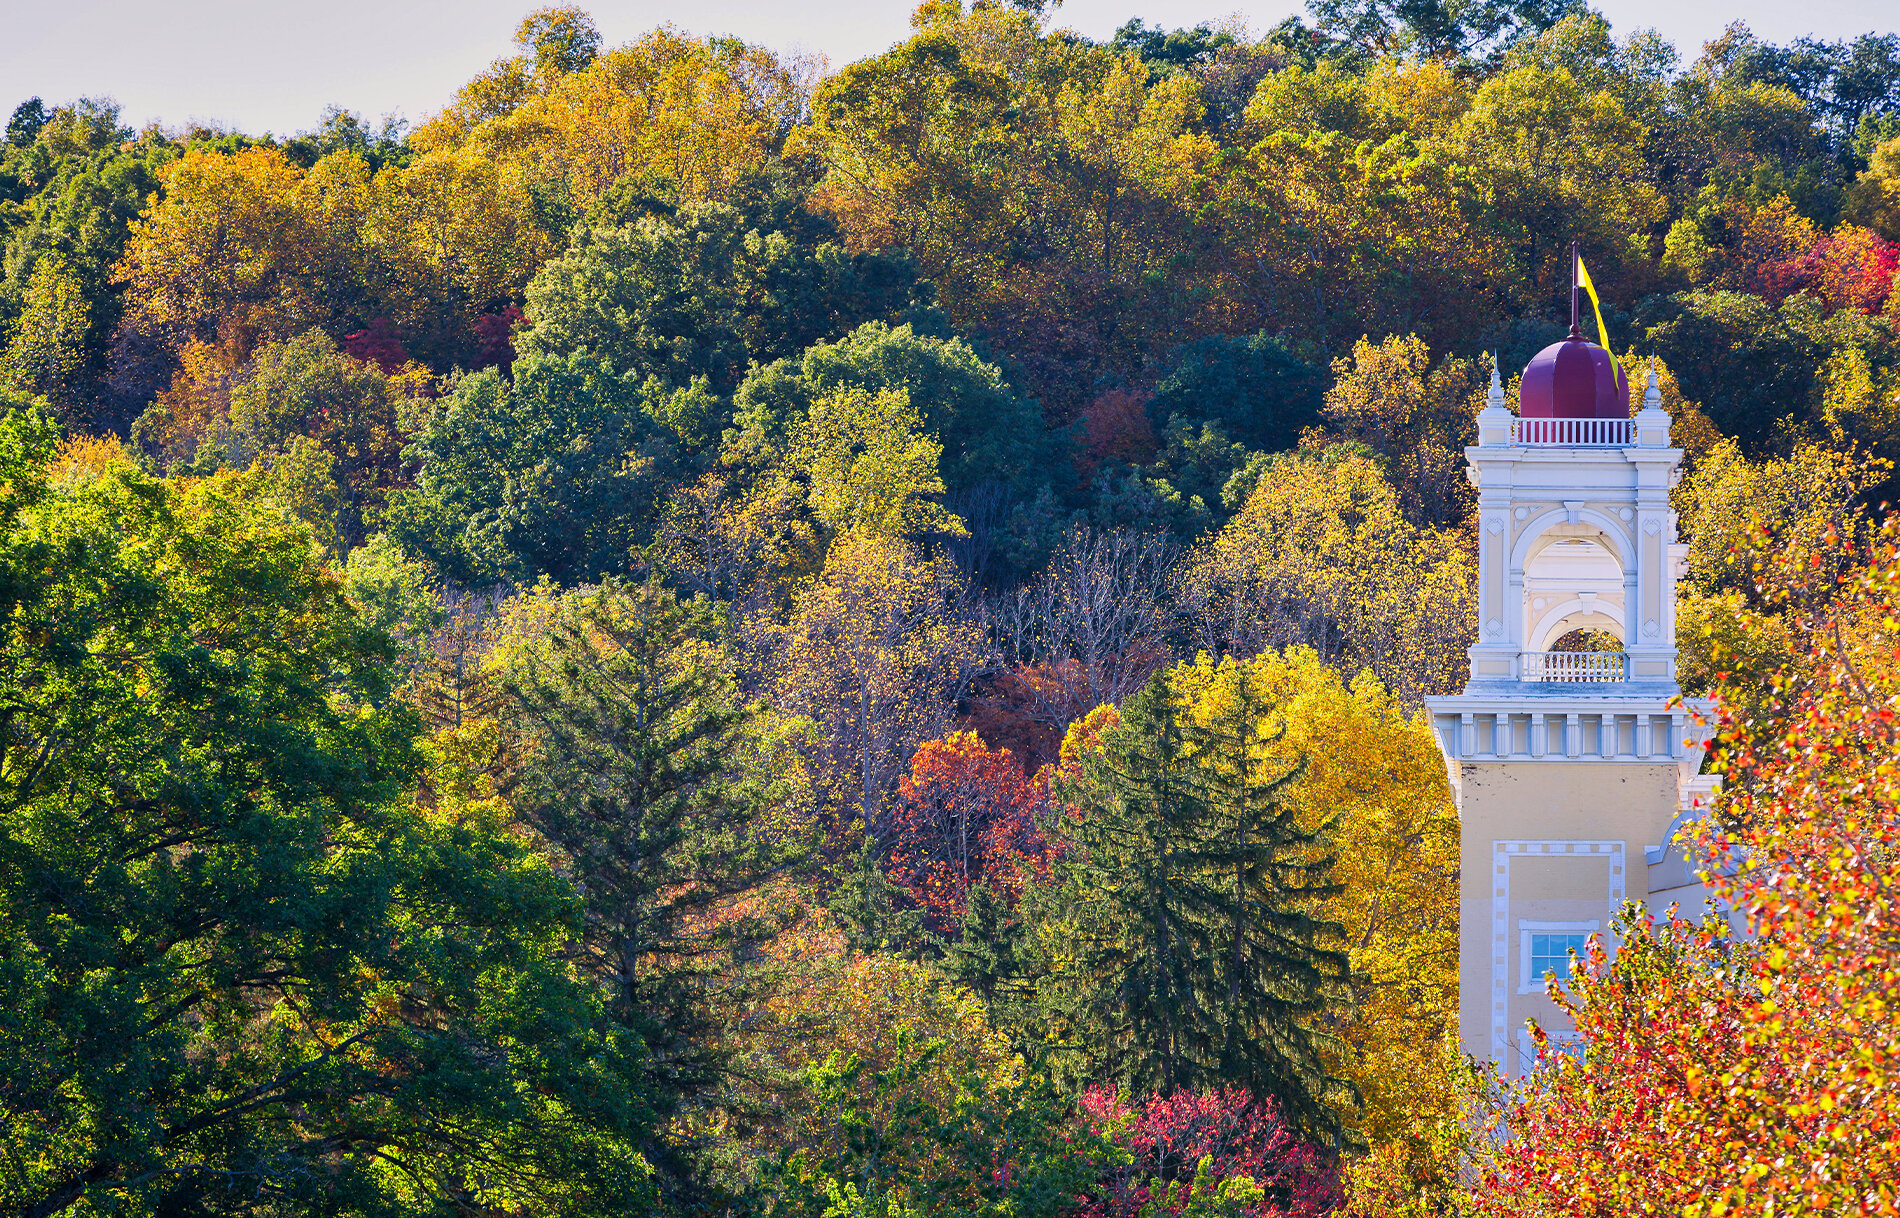 Hotel tower in the fall foliage